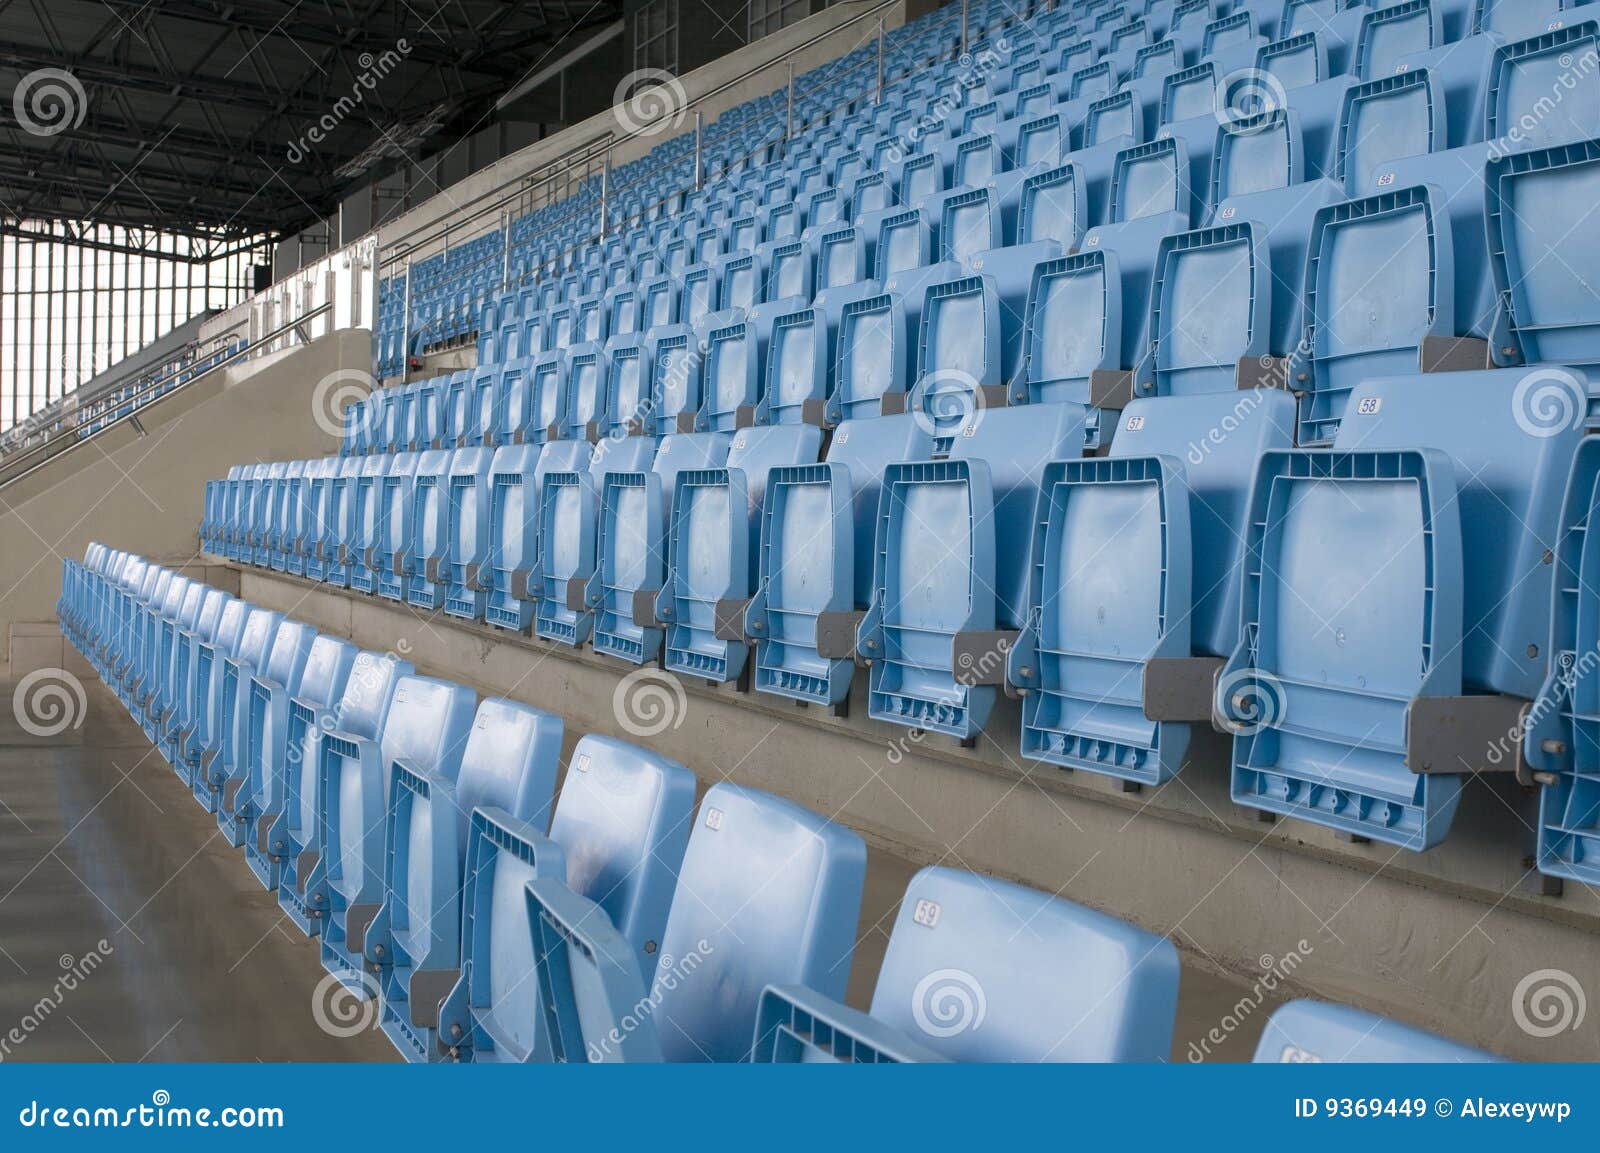 Football stands stock image. Image of elevated, large - 9369449